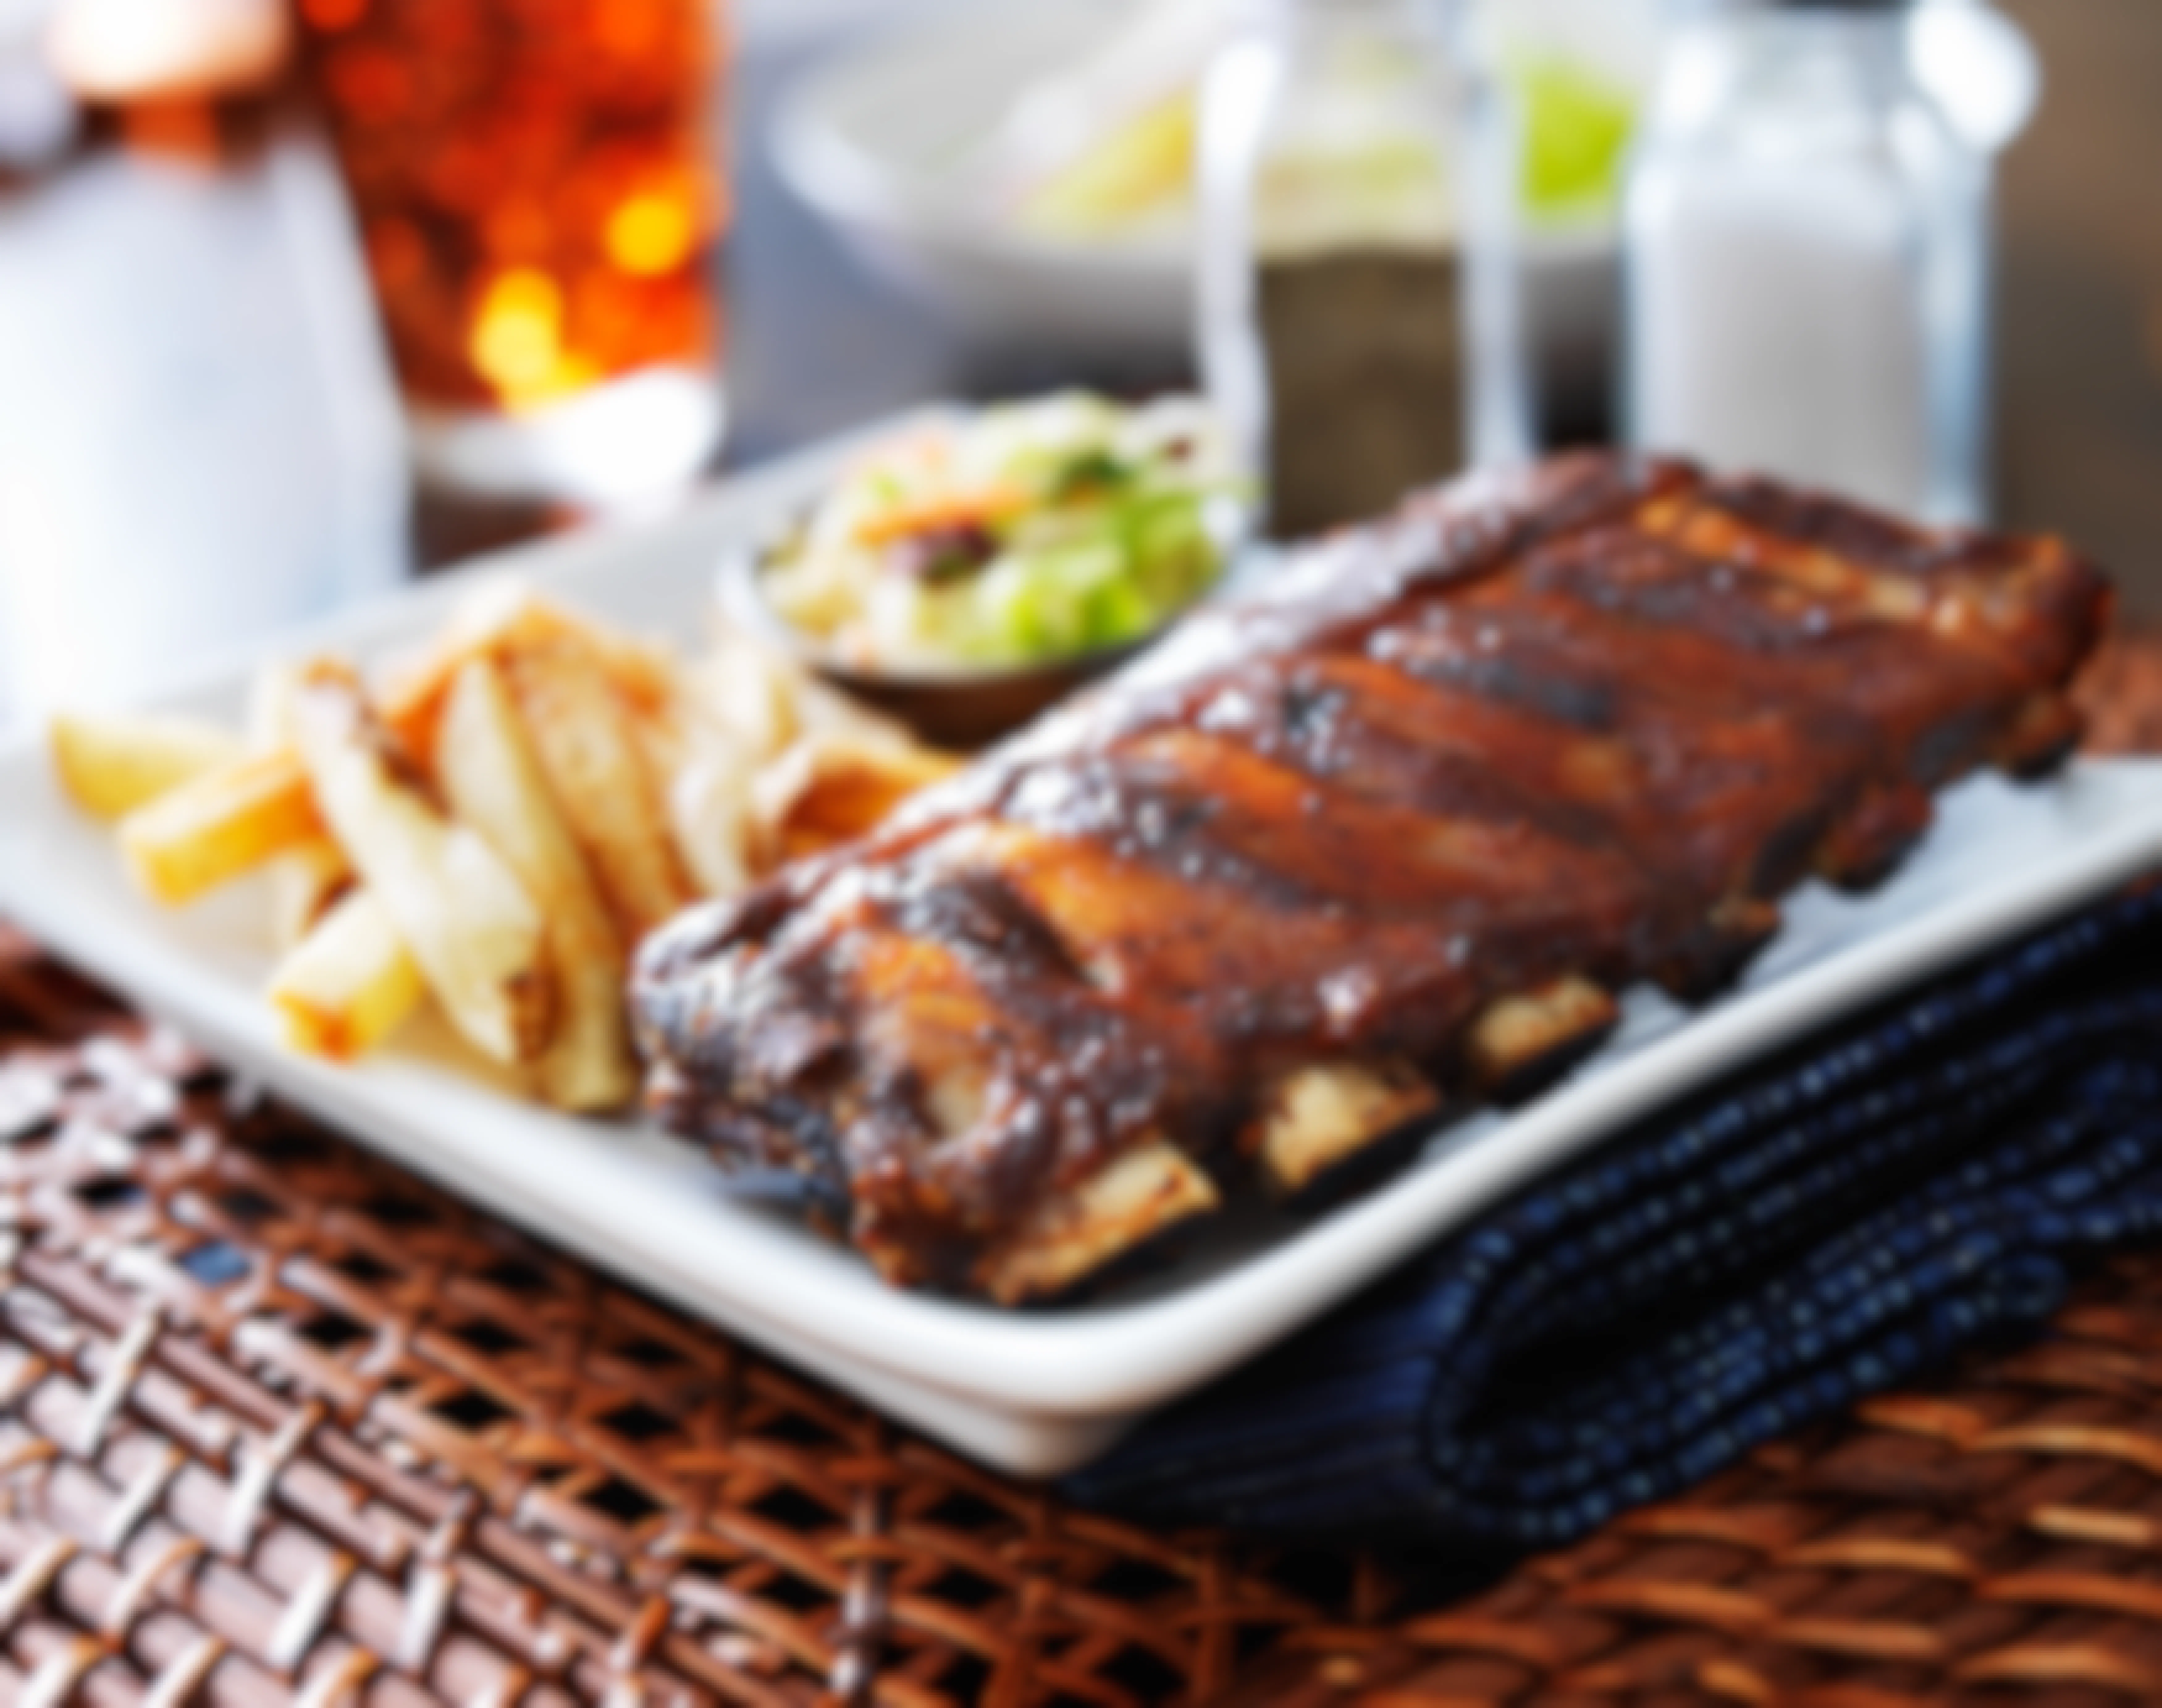 Barbecue ribs on a plate with fries.